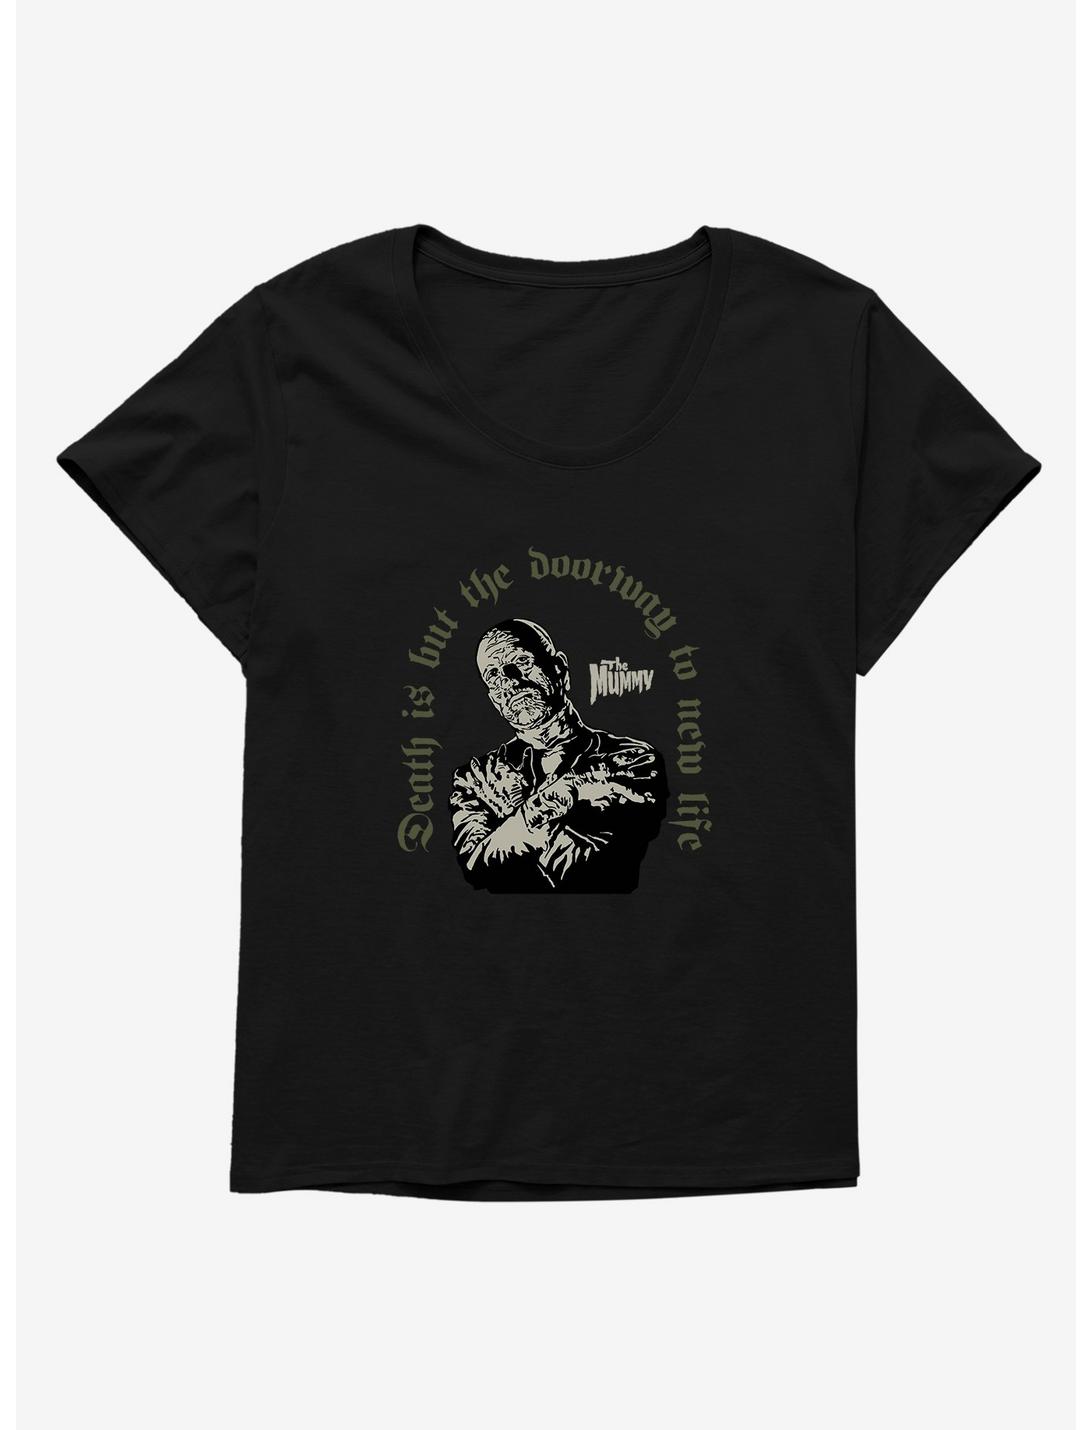 Universal Monsters The Mummy Death Is  A Doorway Girls T-Shirt Plus Size, BLACK, hi-res